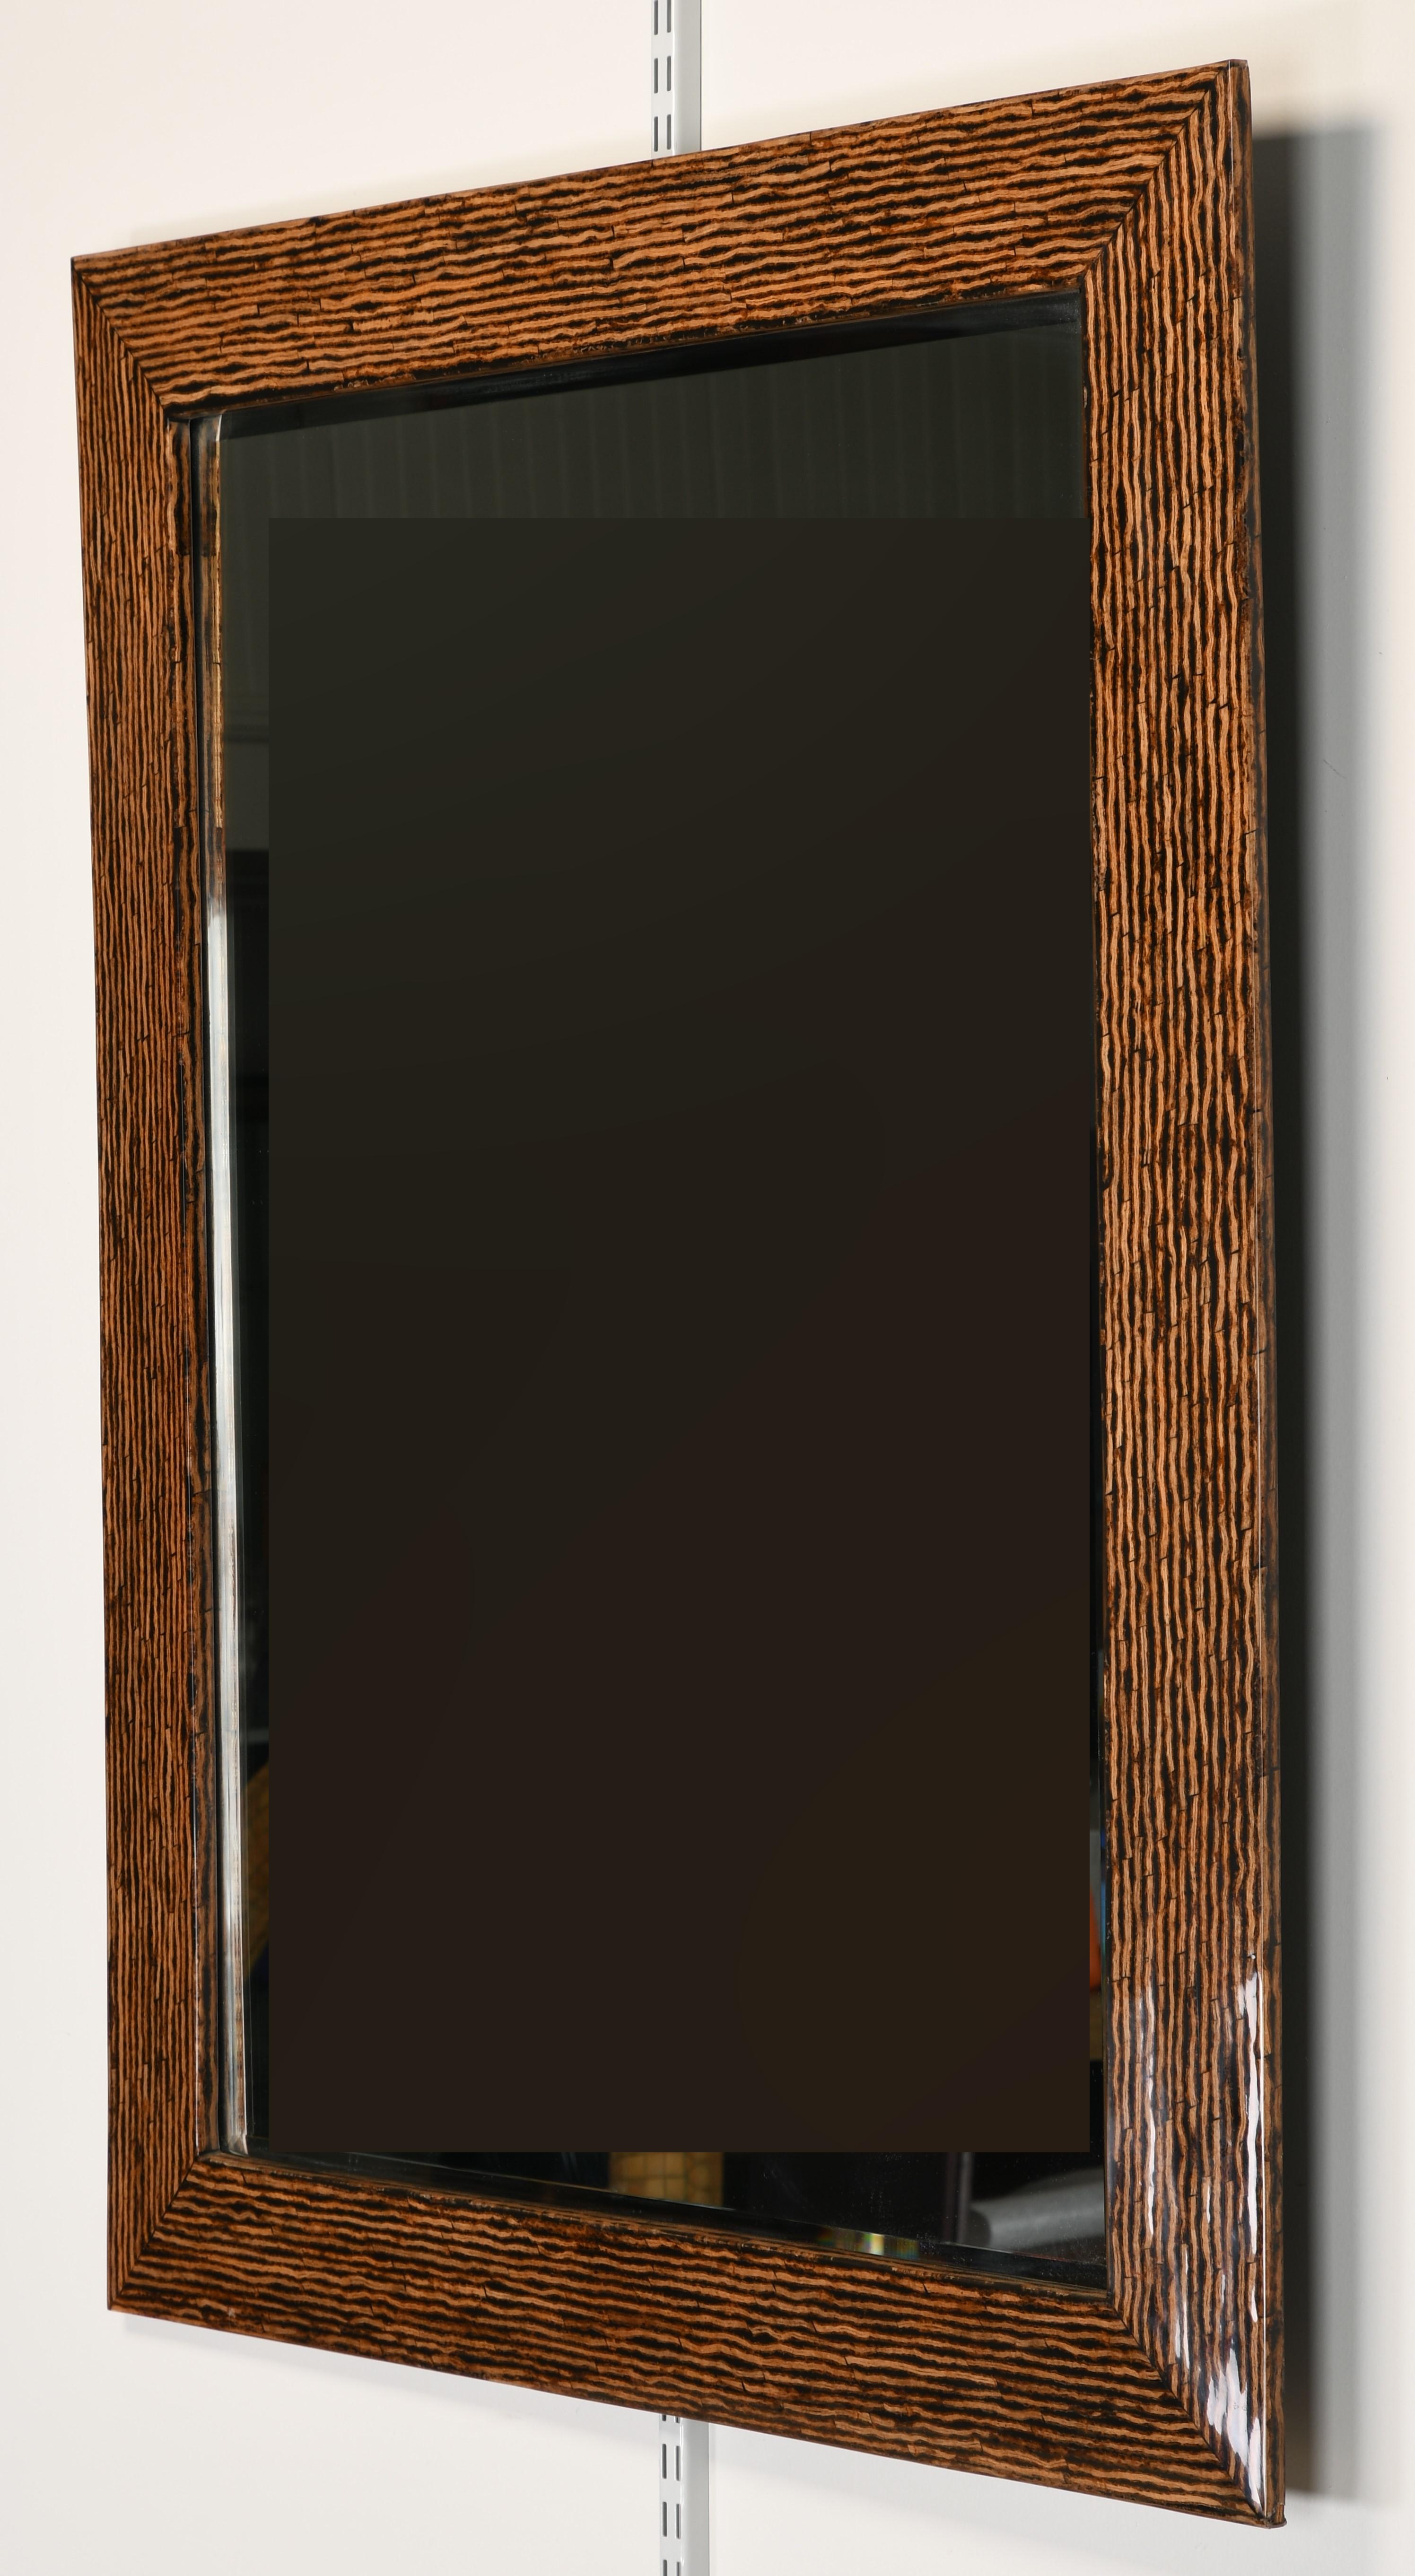 An exotic lacquered Zebra Wood mirror in the manner of Karl Springer. This mirror came out of an interior designer's home which was decorated with Donghia and Kreiss Furniture from the 1980s. Would look great in a traditional or modern setting. Good